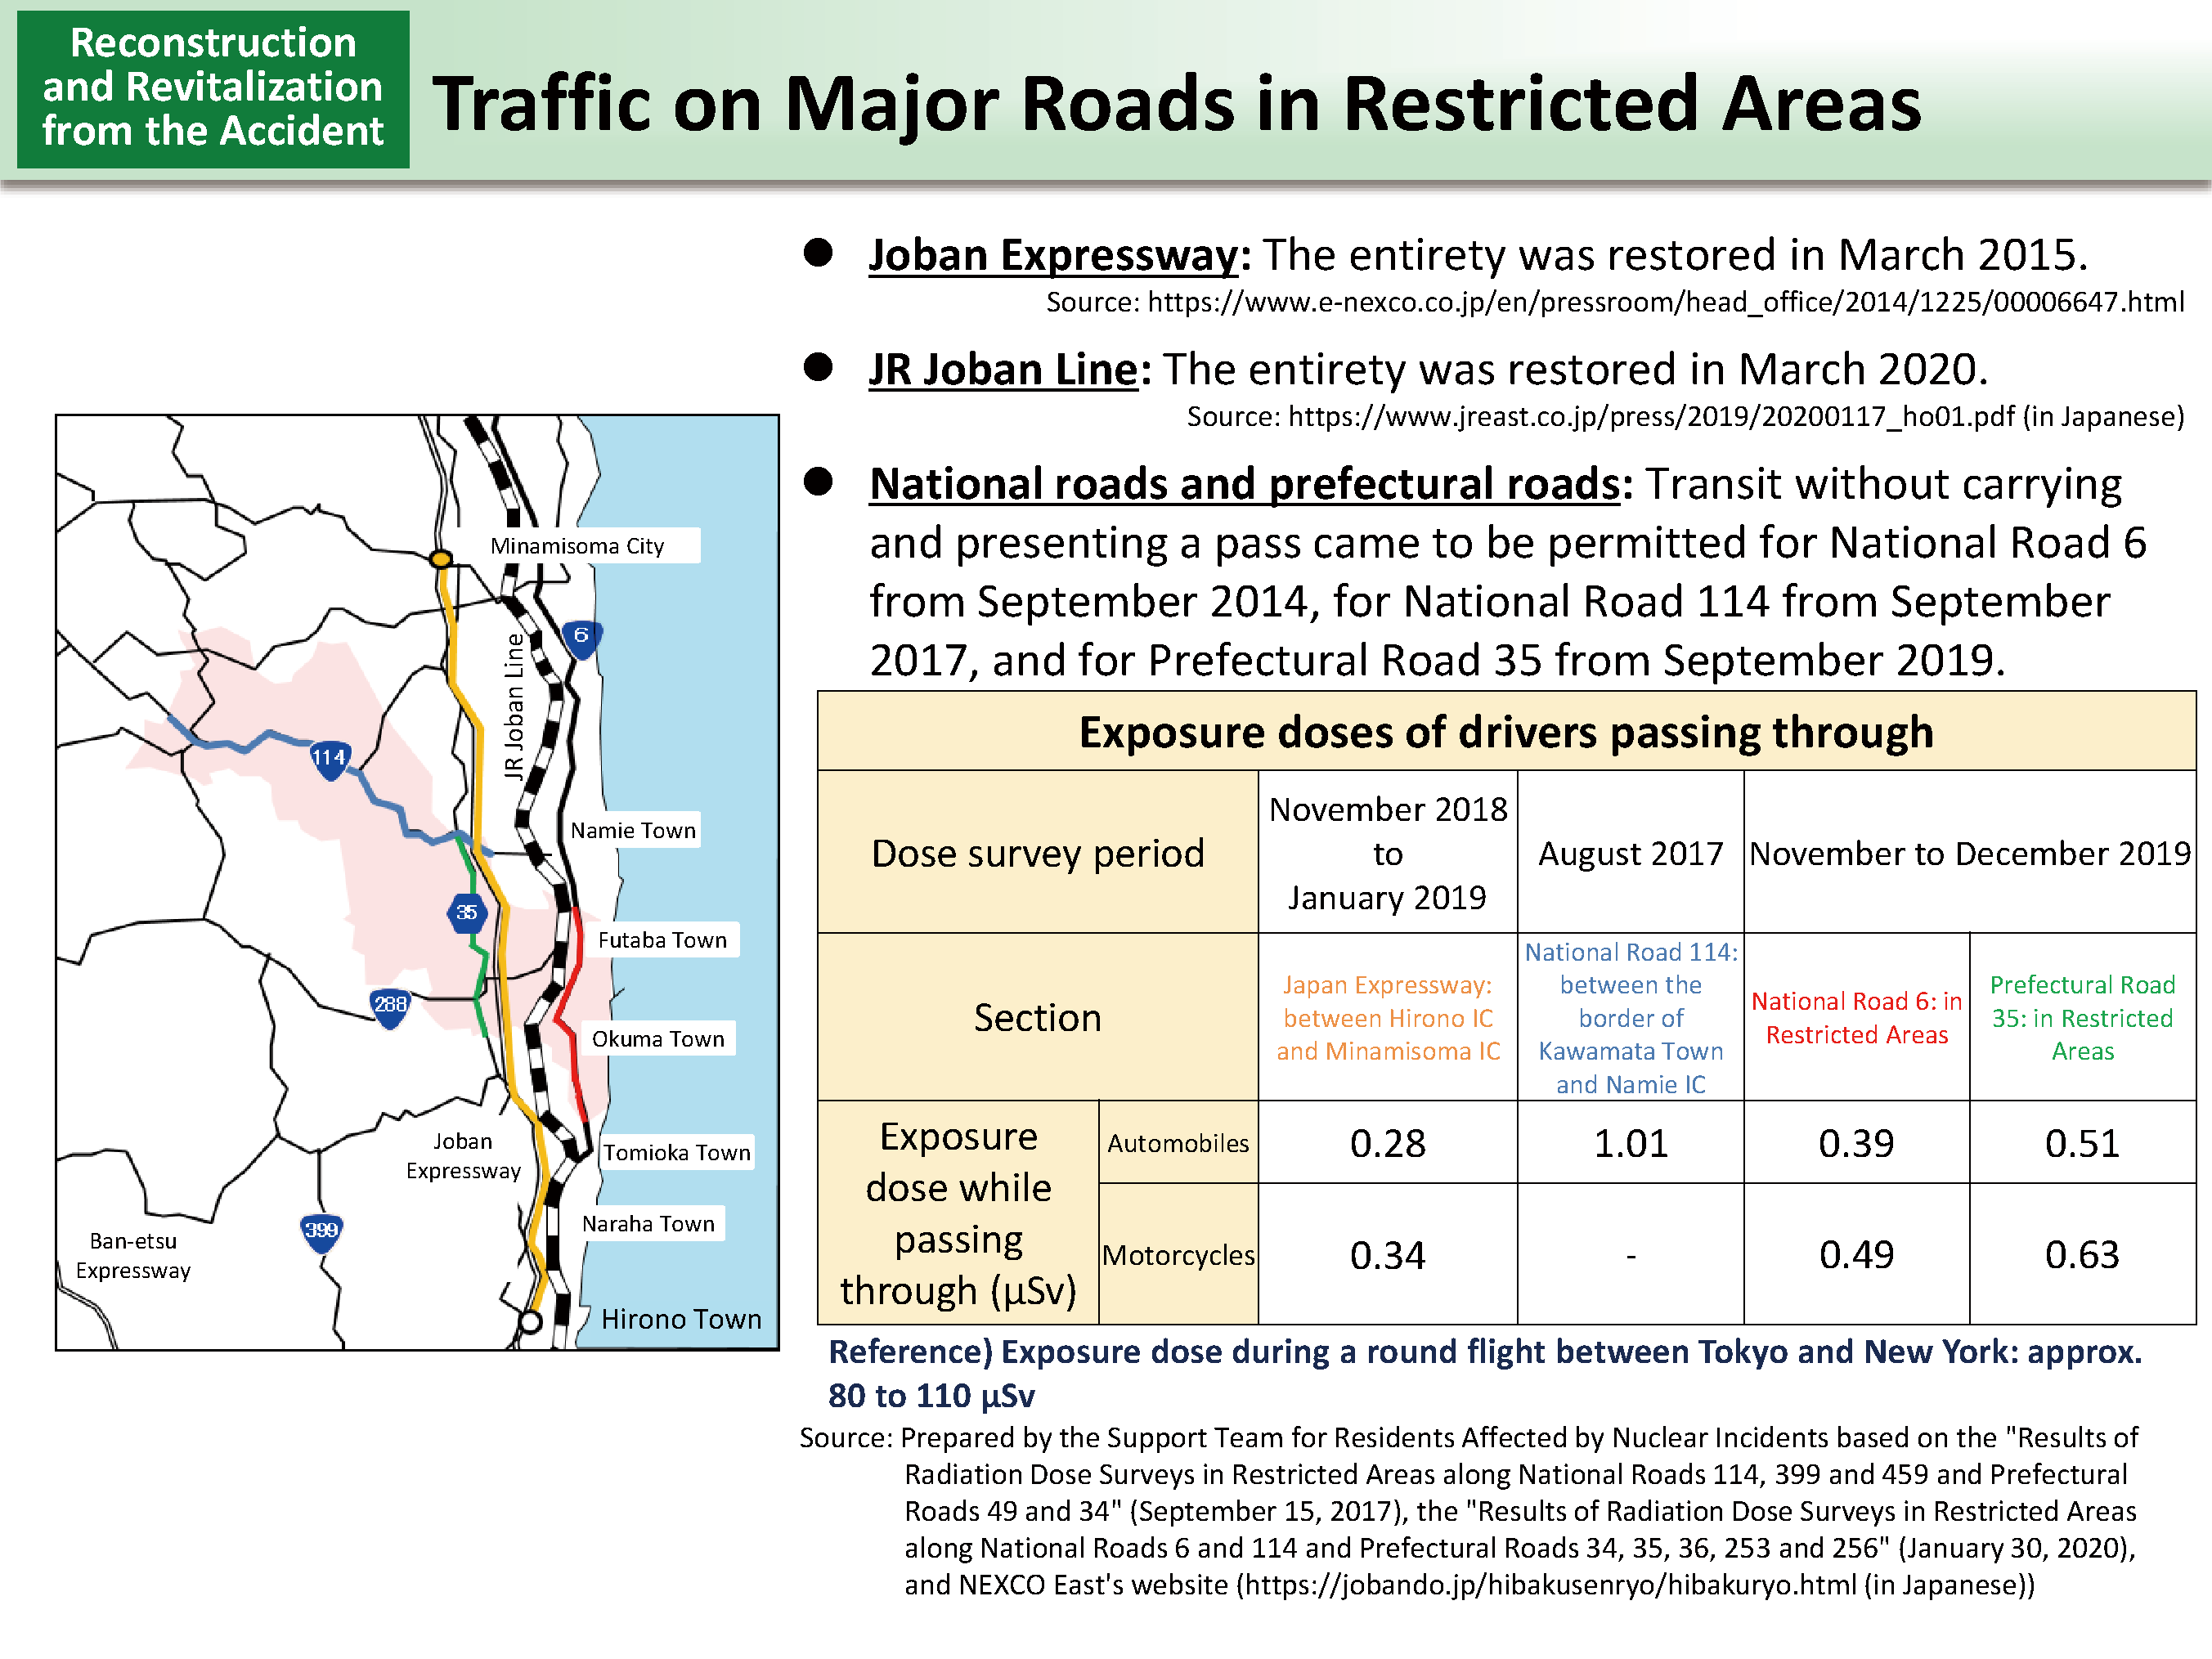 Traffic on Major Roads in Restricted Areas_Figure